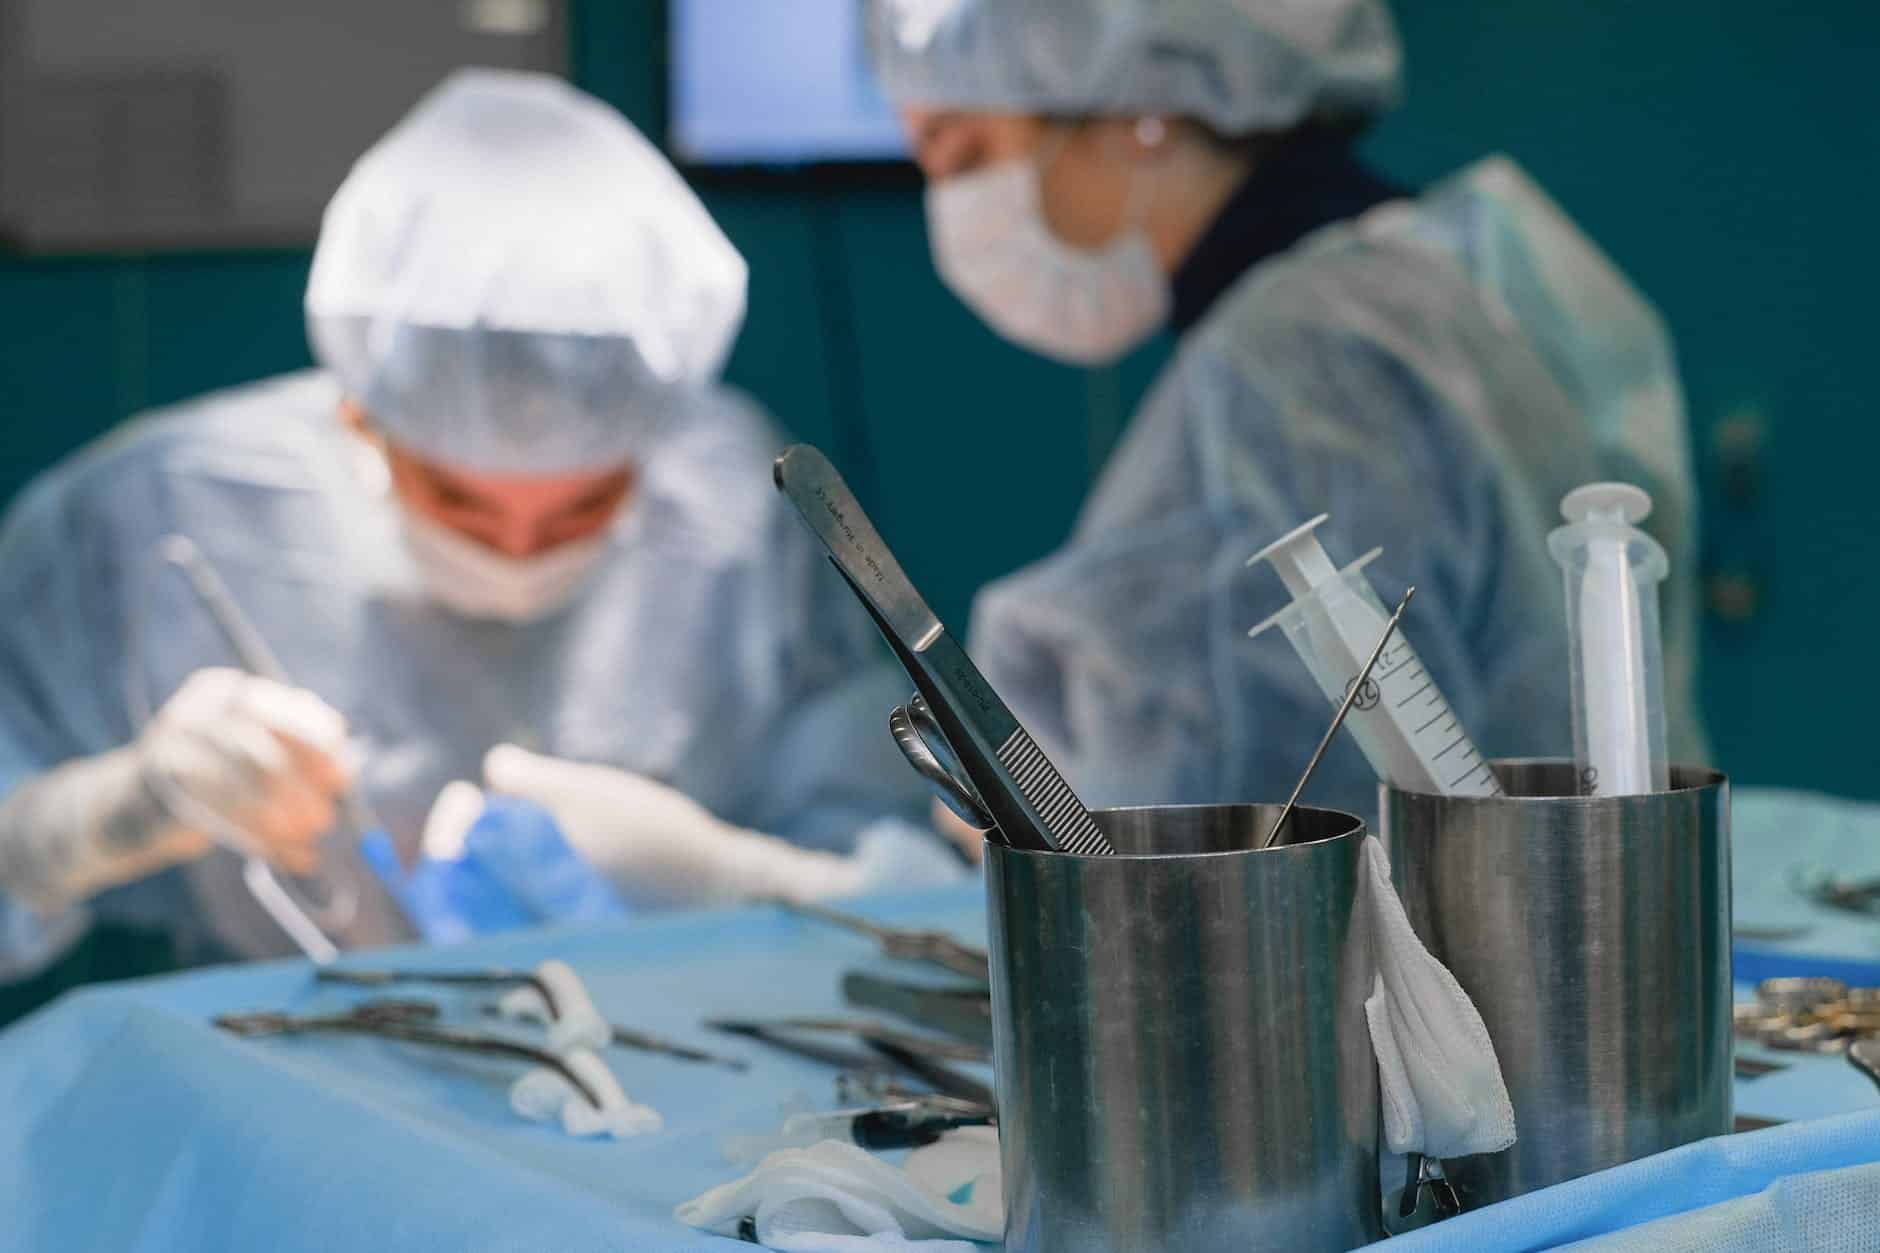 medical instruments and a surgeon during a surgery